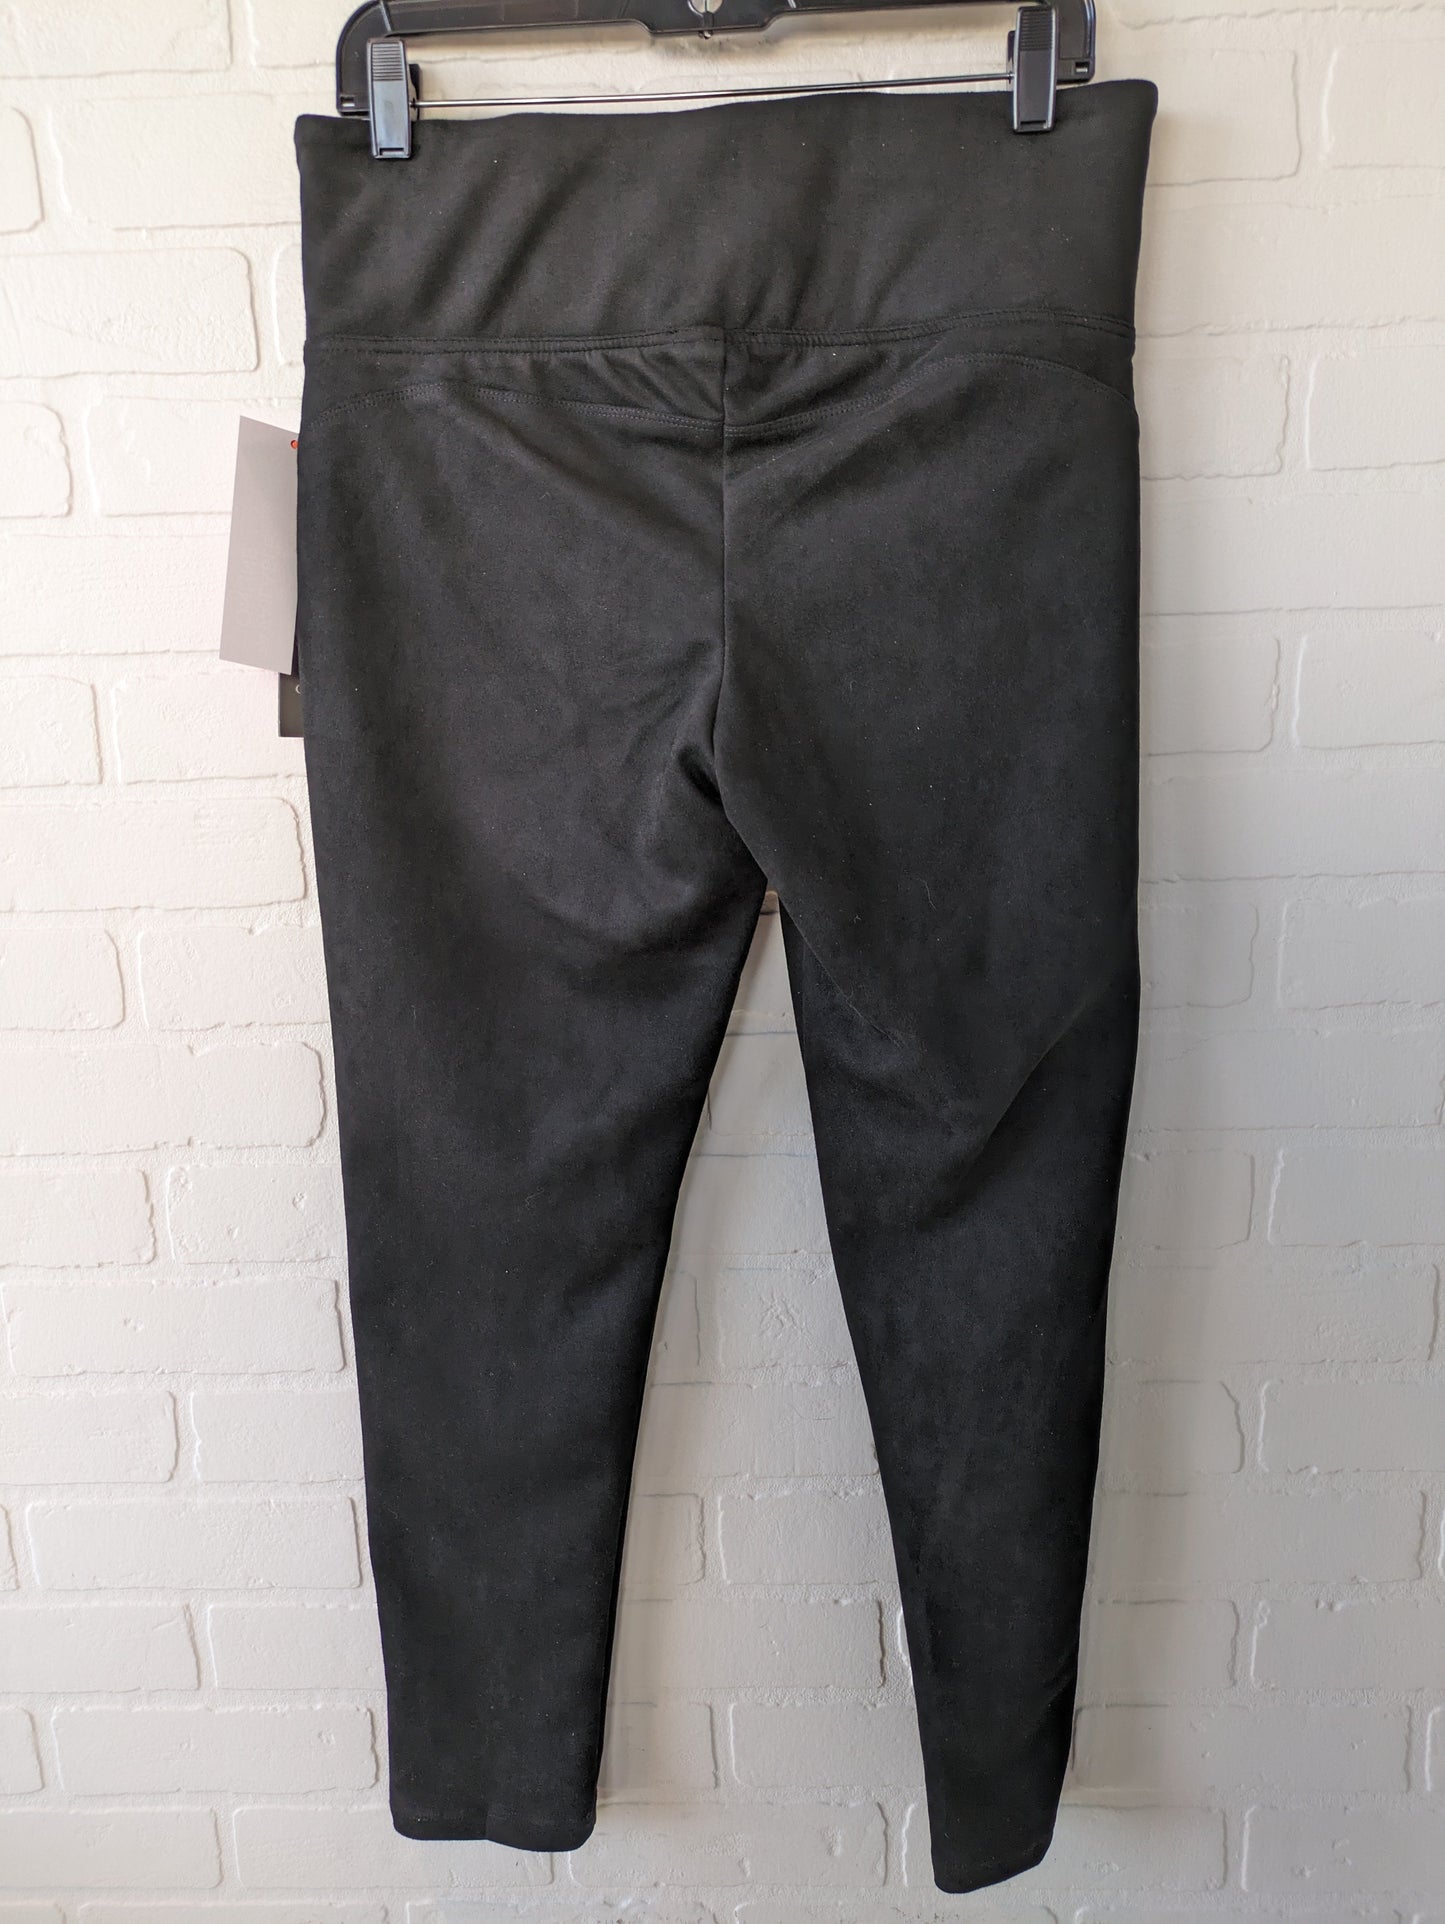 Pants Ankle By Vince Camuto  Size: 8